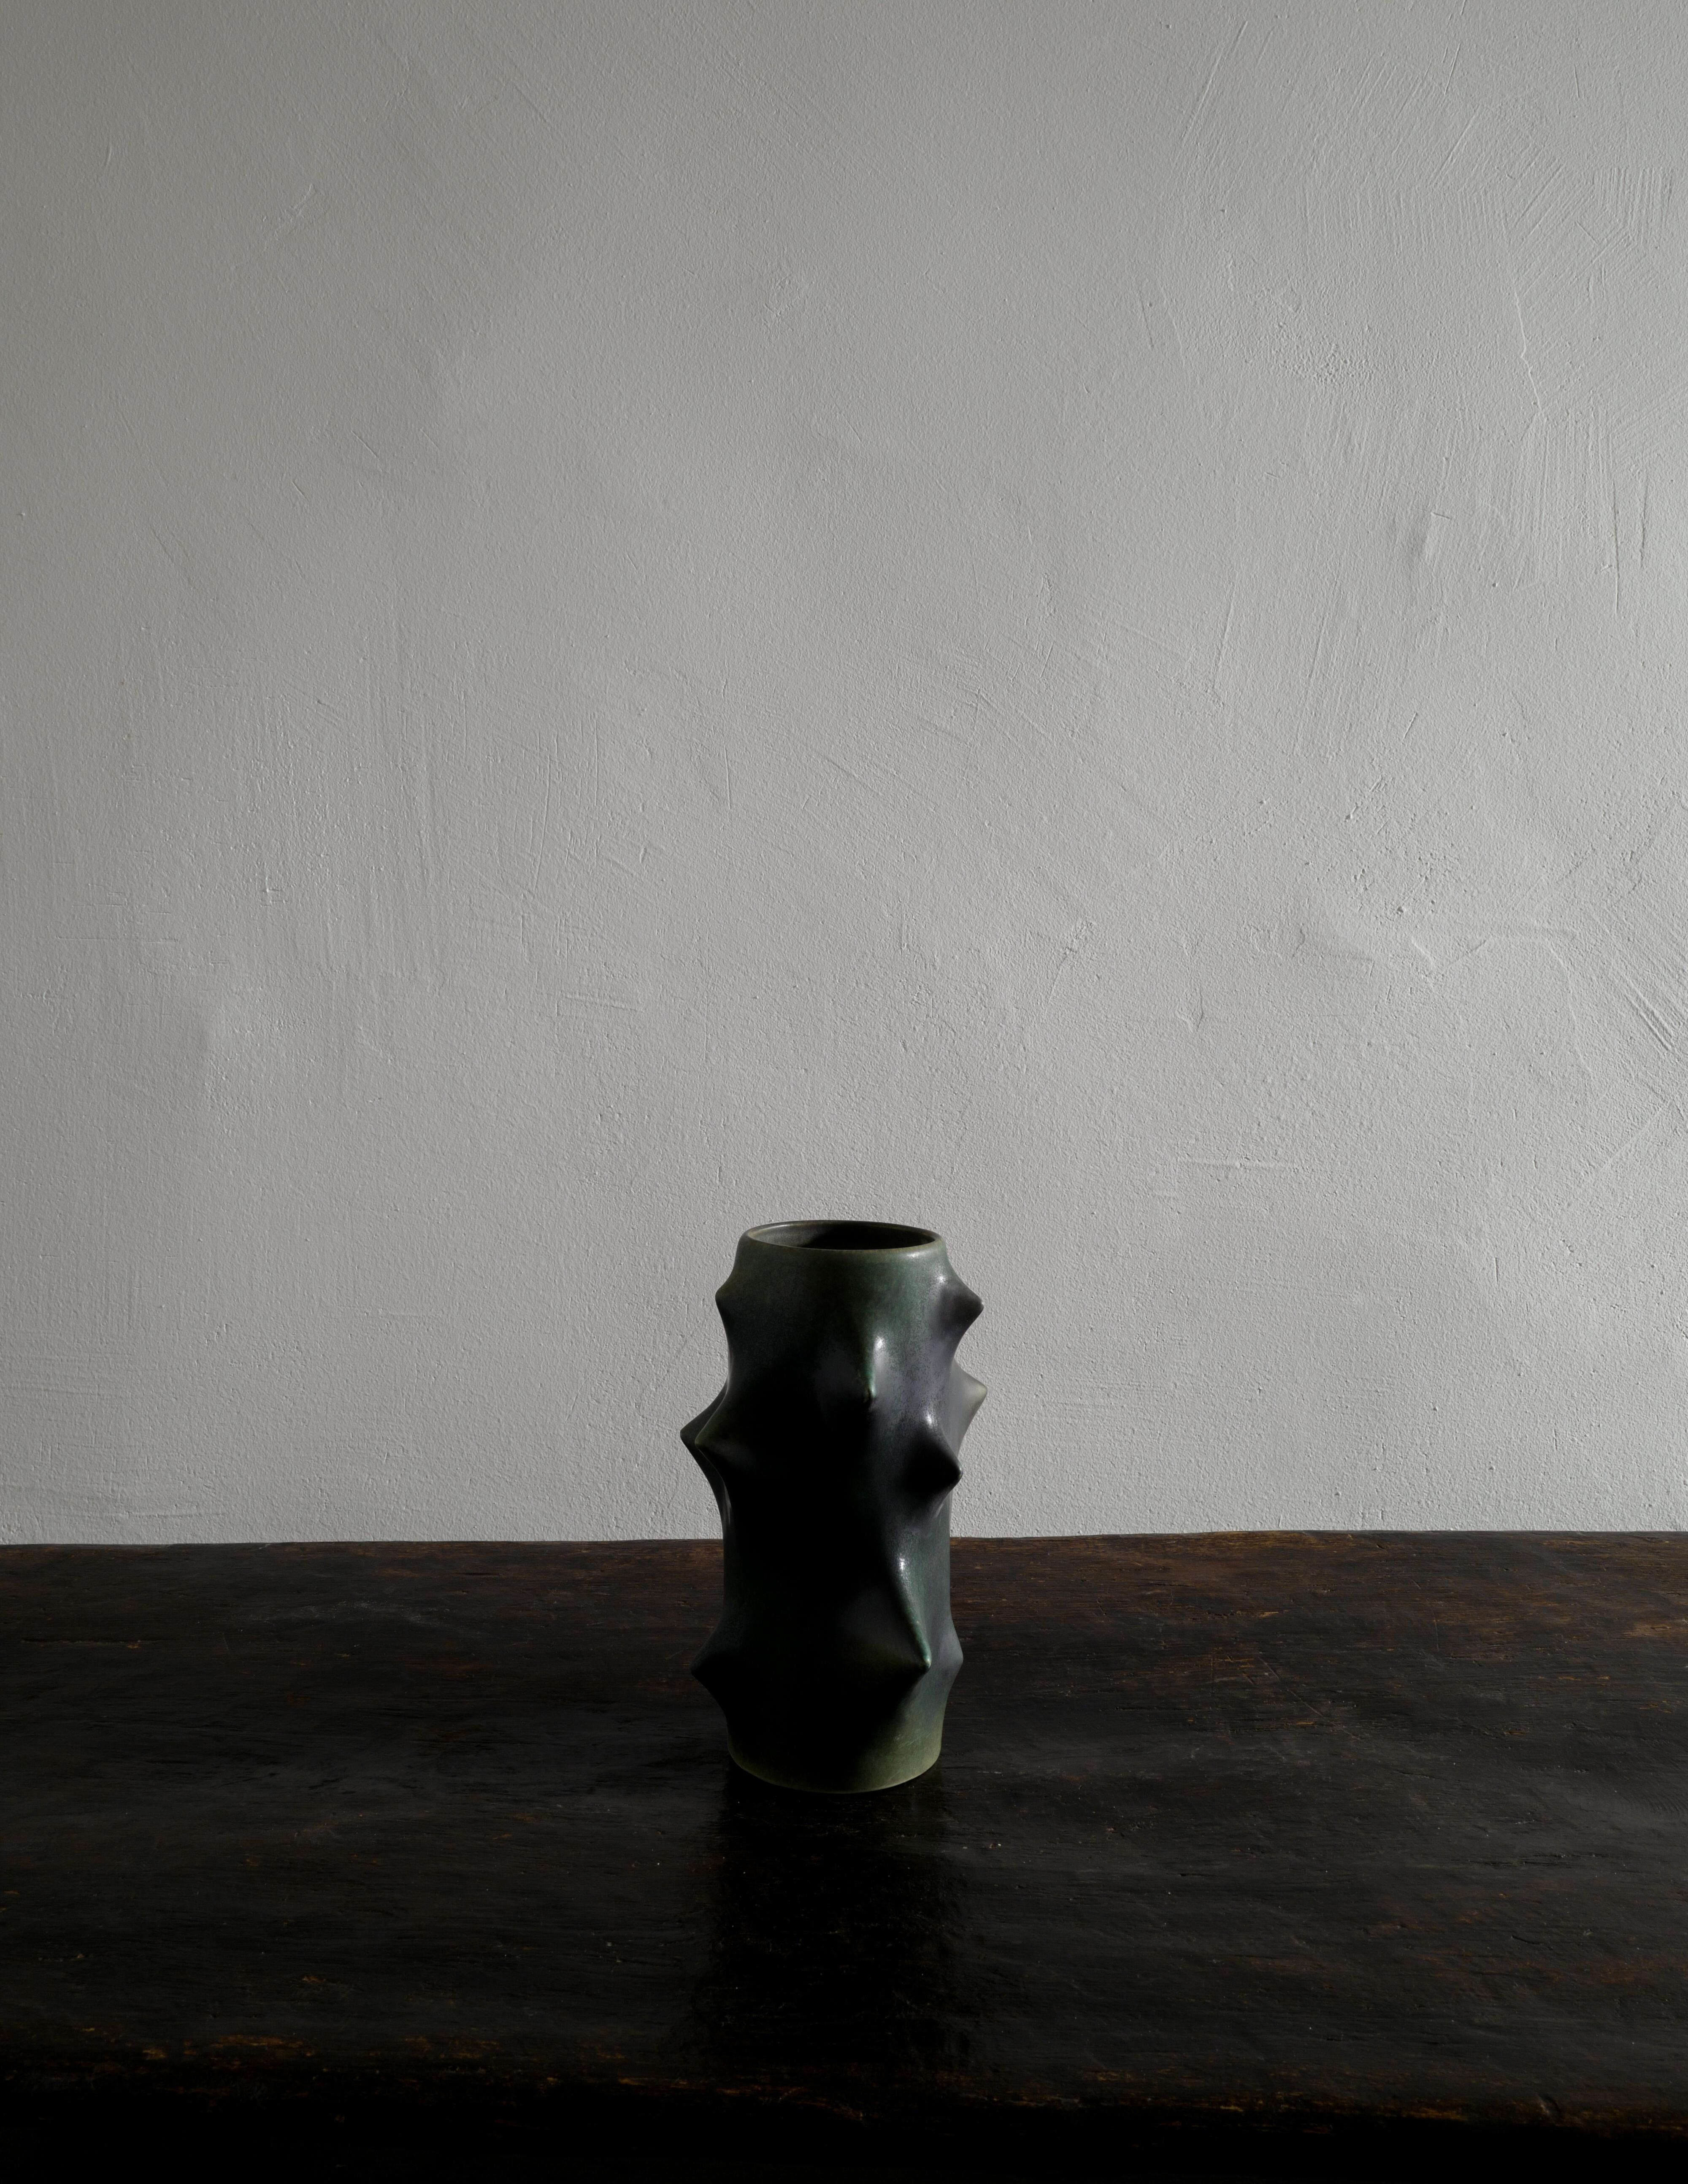 Rare thorn vase in dark green designed by Knud Basse and produced by Michael Andersen, Denmark. In good vintage condition with small signs from use and signed / marked at the bottom. We have more vases in this style by Knud Basse if you're looking